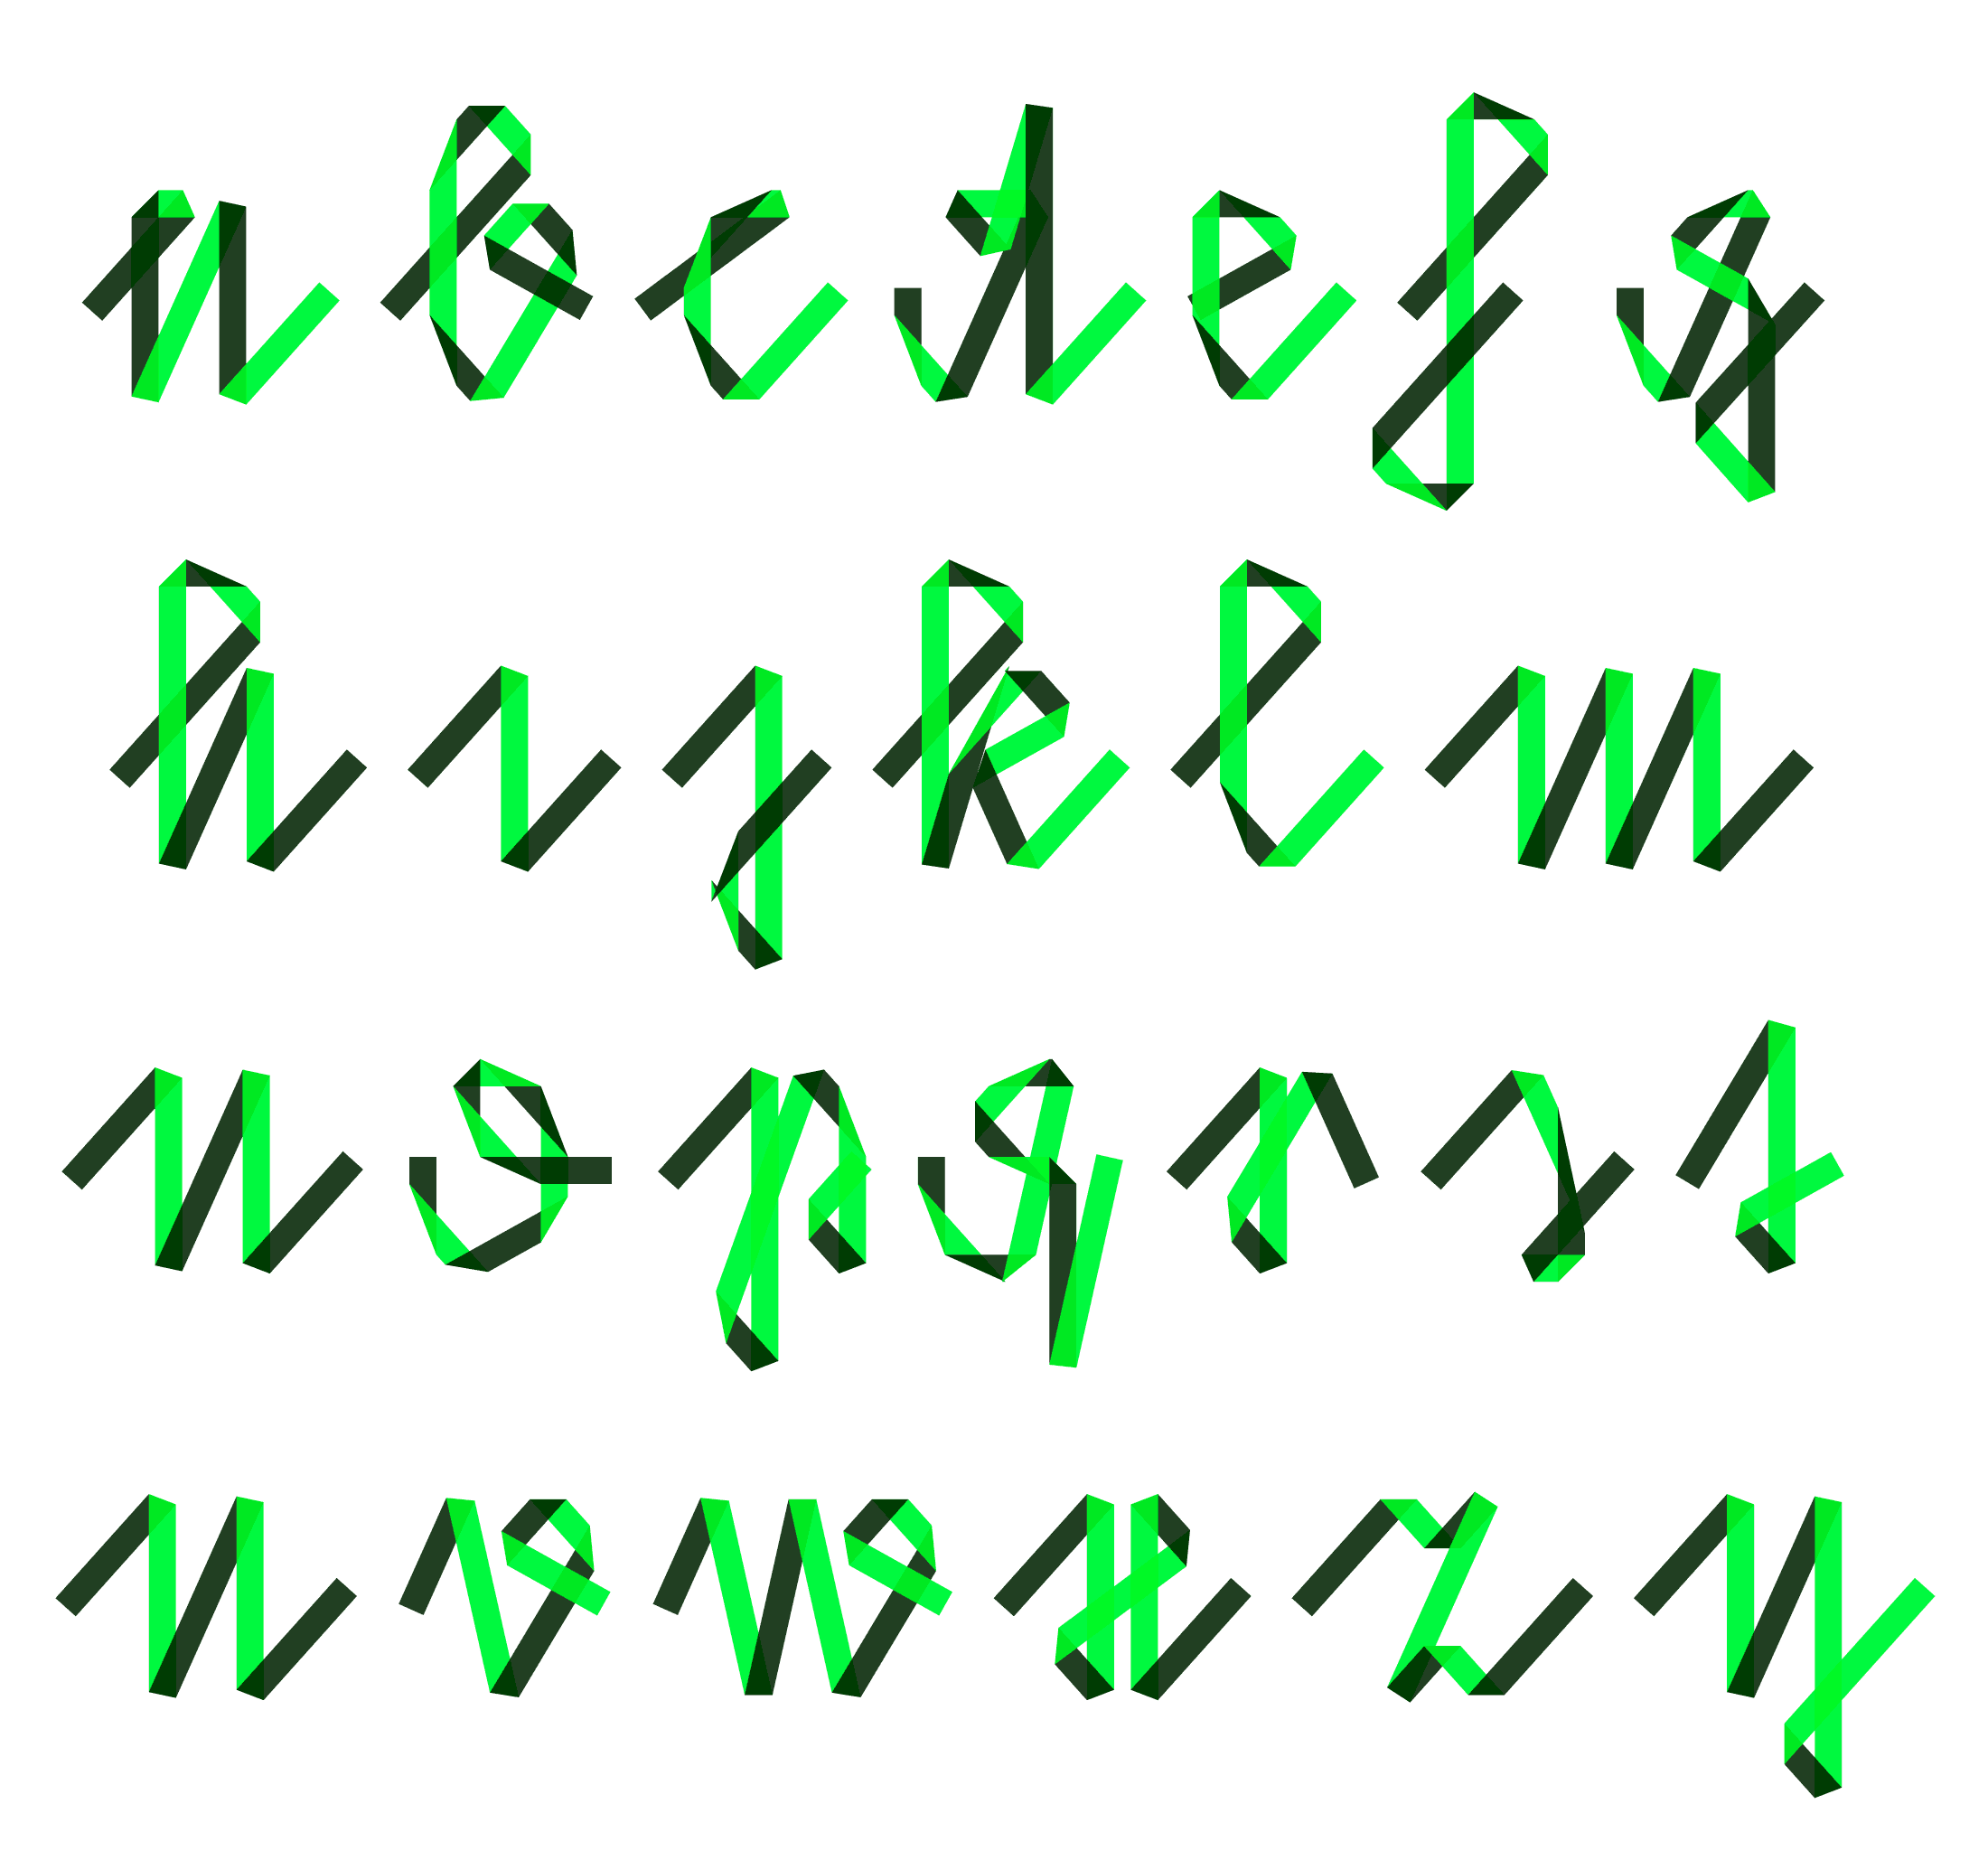 Lowercase set in one of the foldfonts